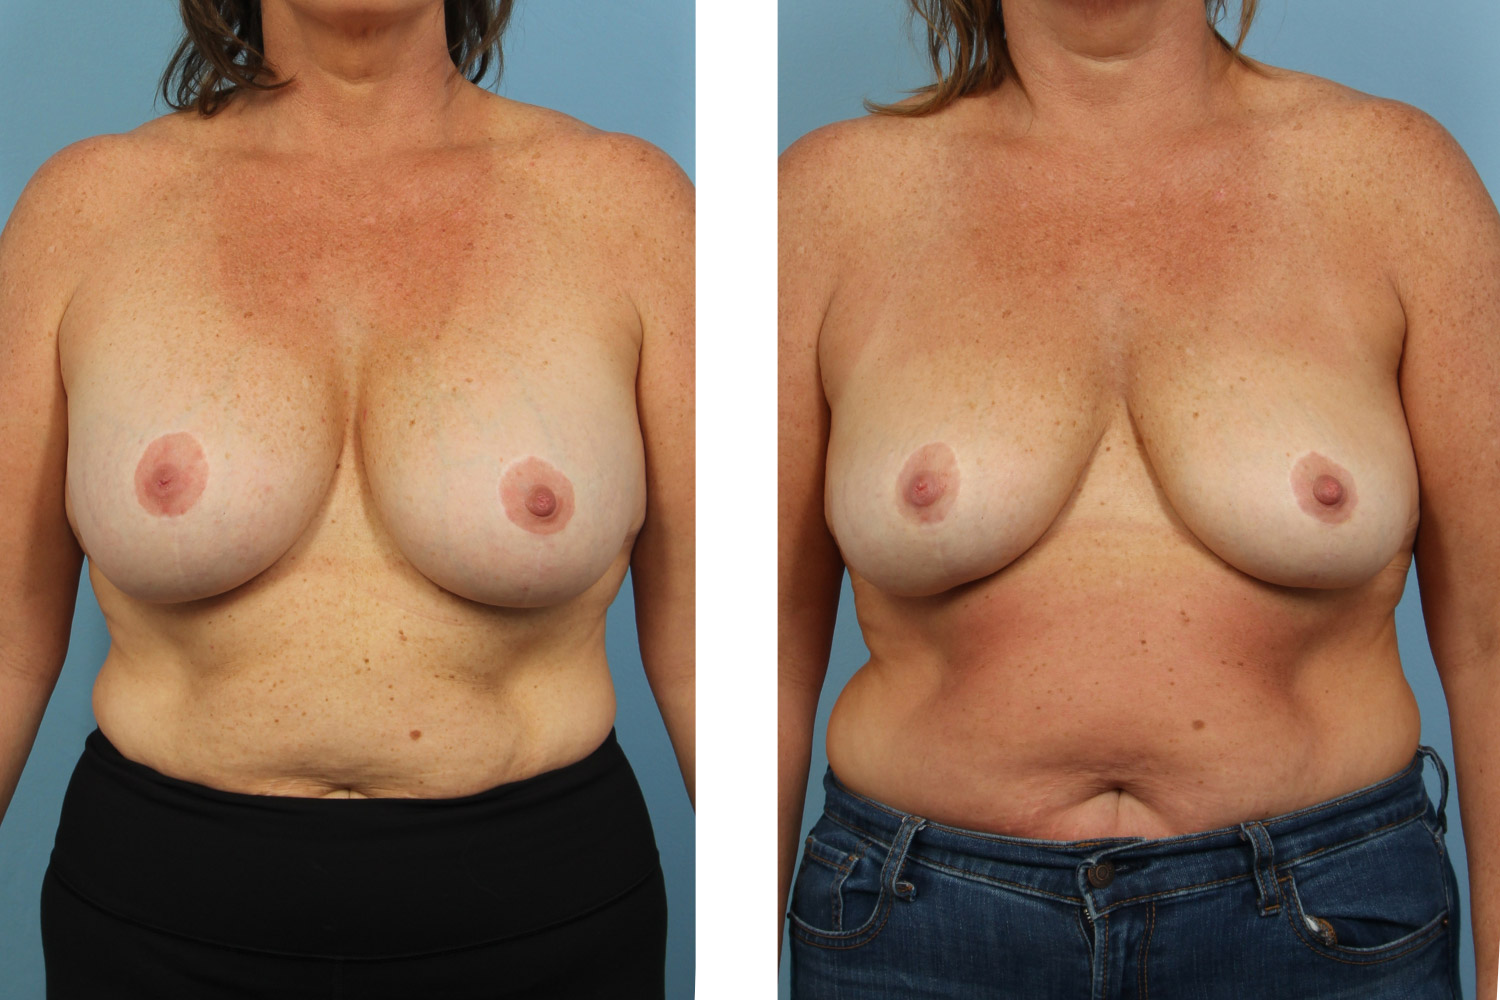 Breast implant removal and capsulectomy on a 45-year-old woman